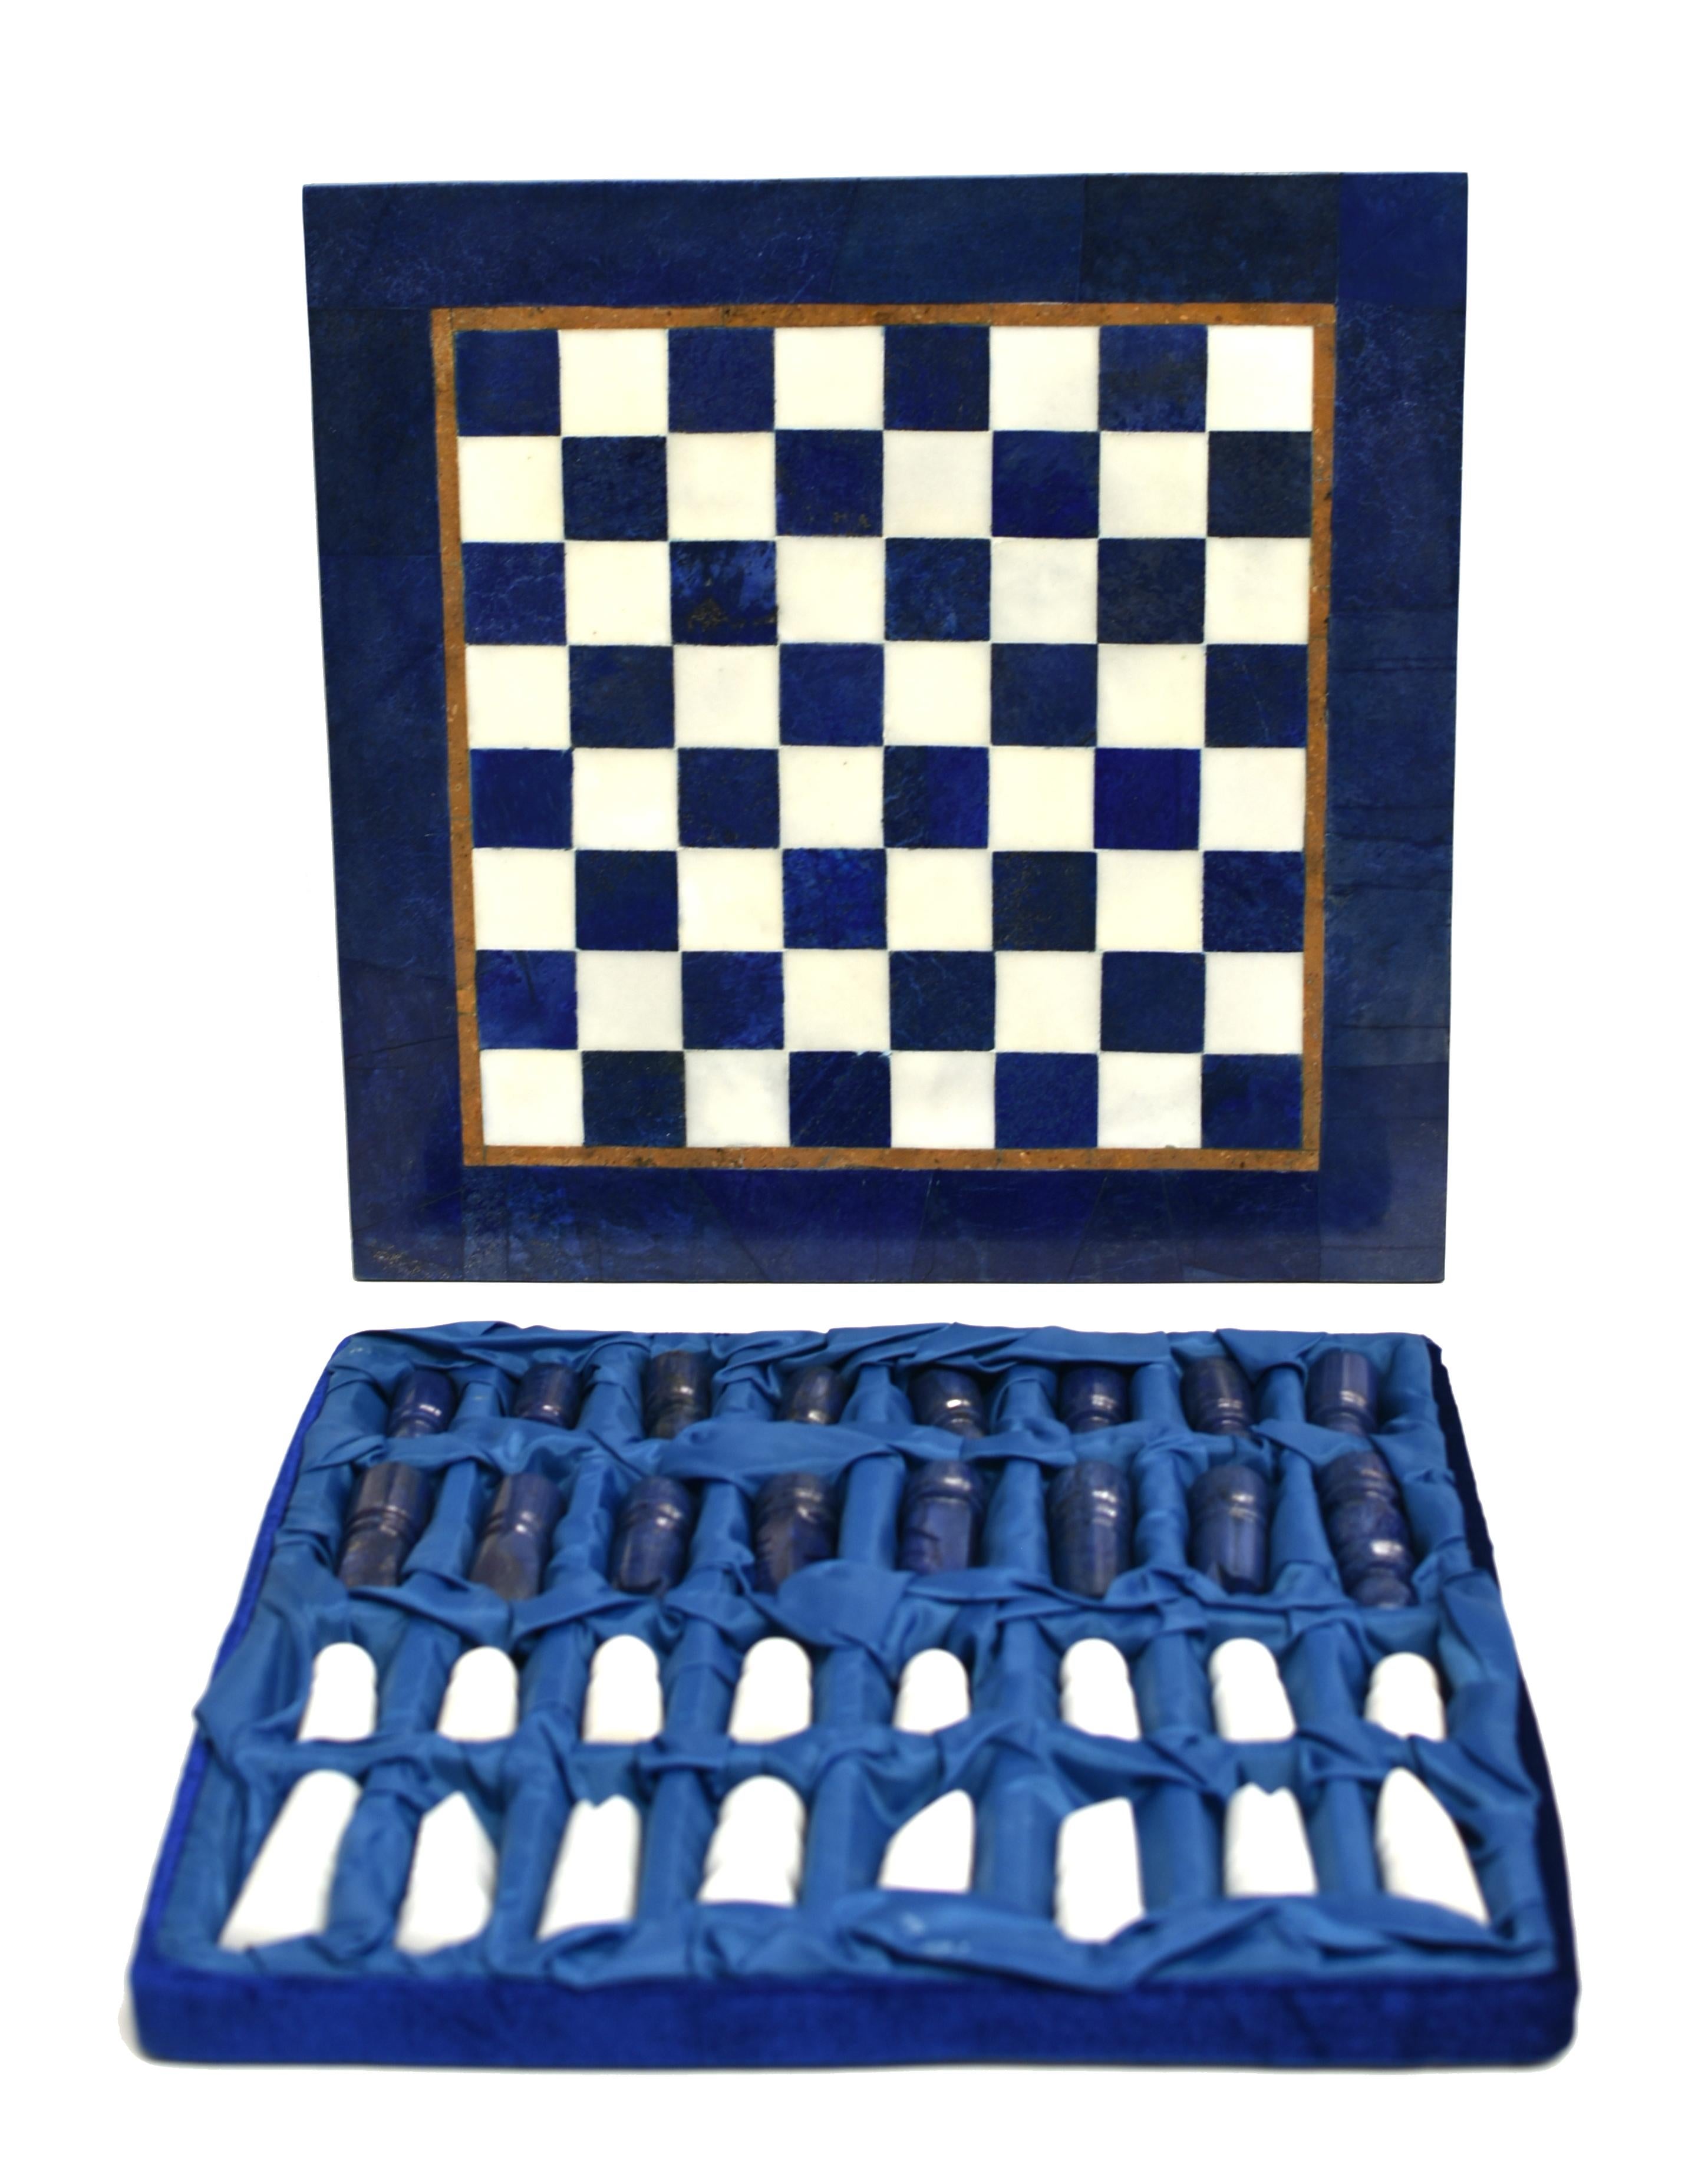 A large, elegant gemstone chess set. The set is with hand-cut genuine lapis lazuli and Carrara marble squares, and an inlaid border of butterscotch granite, all meticulously arranged to create a luxurious game board. Polished to perfect smoothness